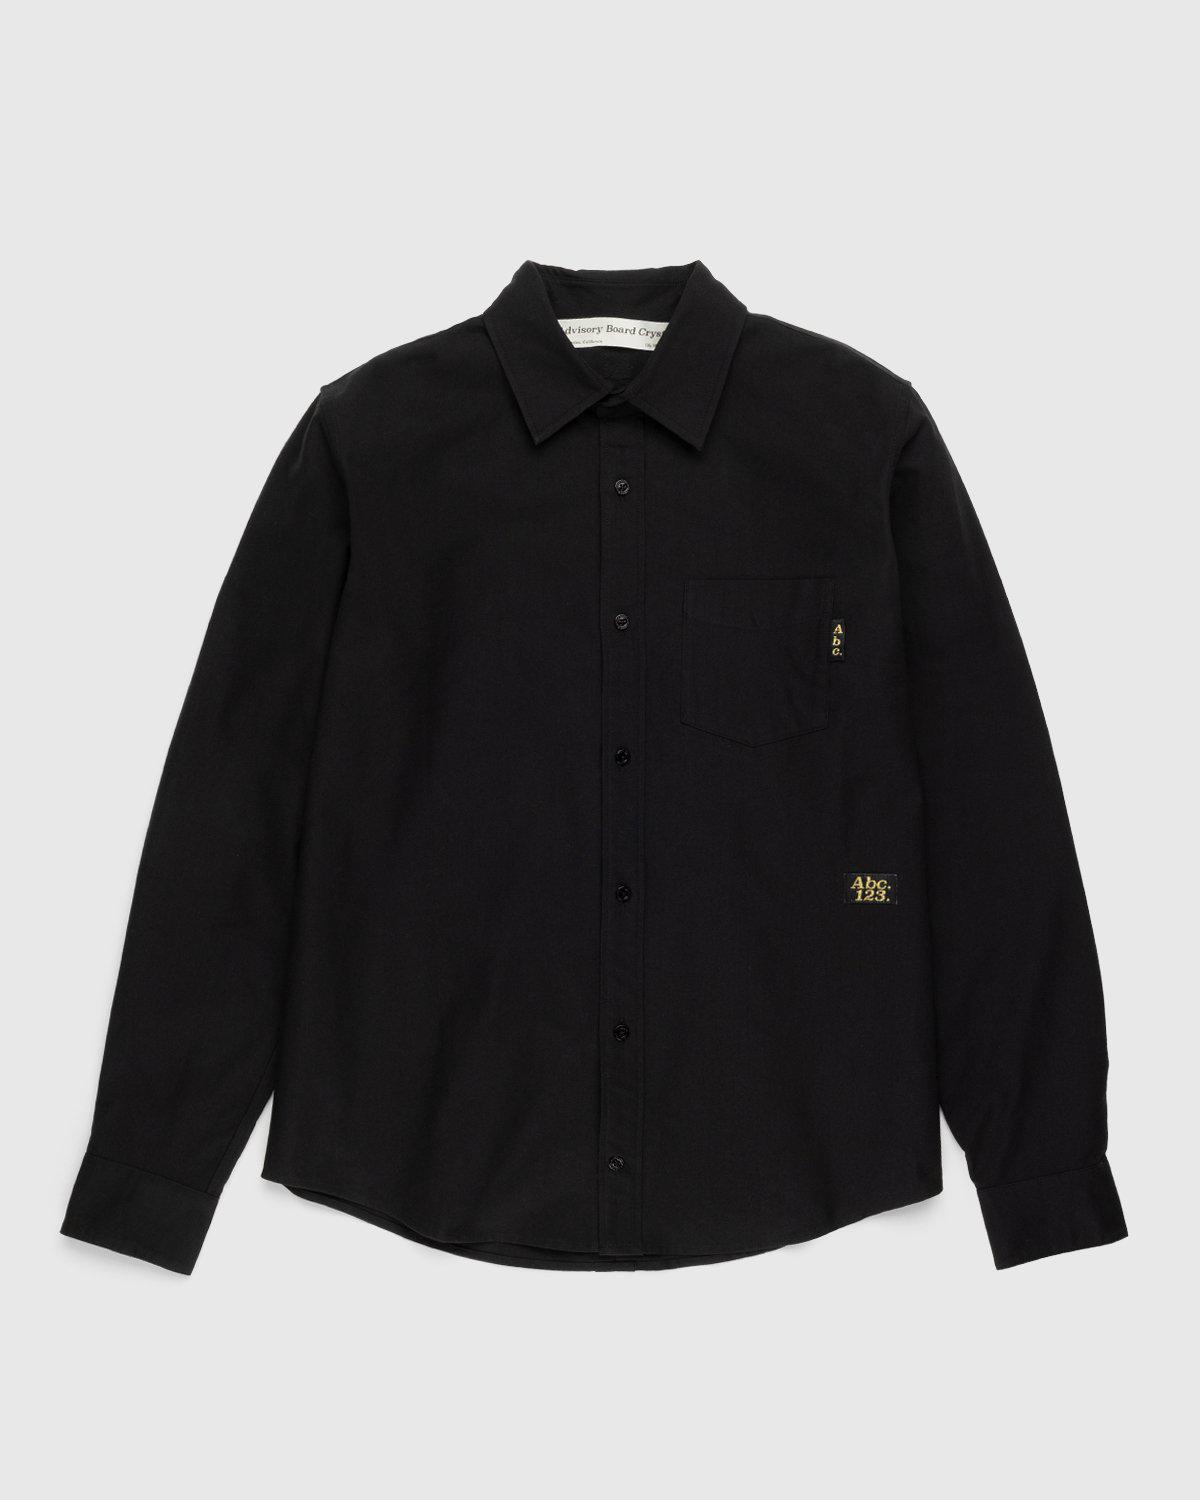 Abc. – Oxford Woven Shirt Anthracite by ABC.